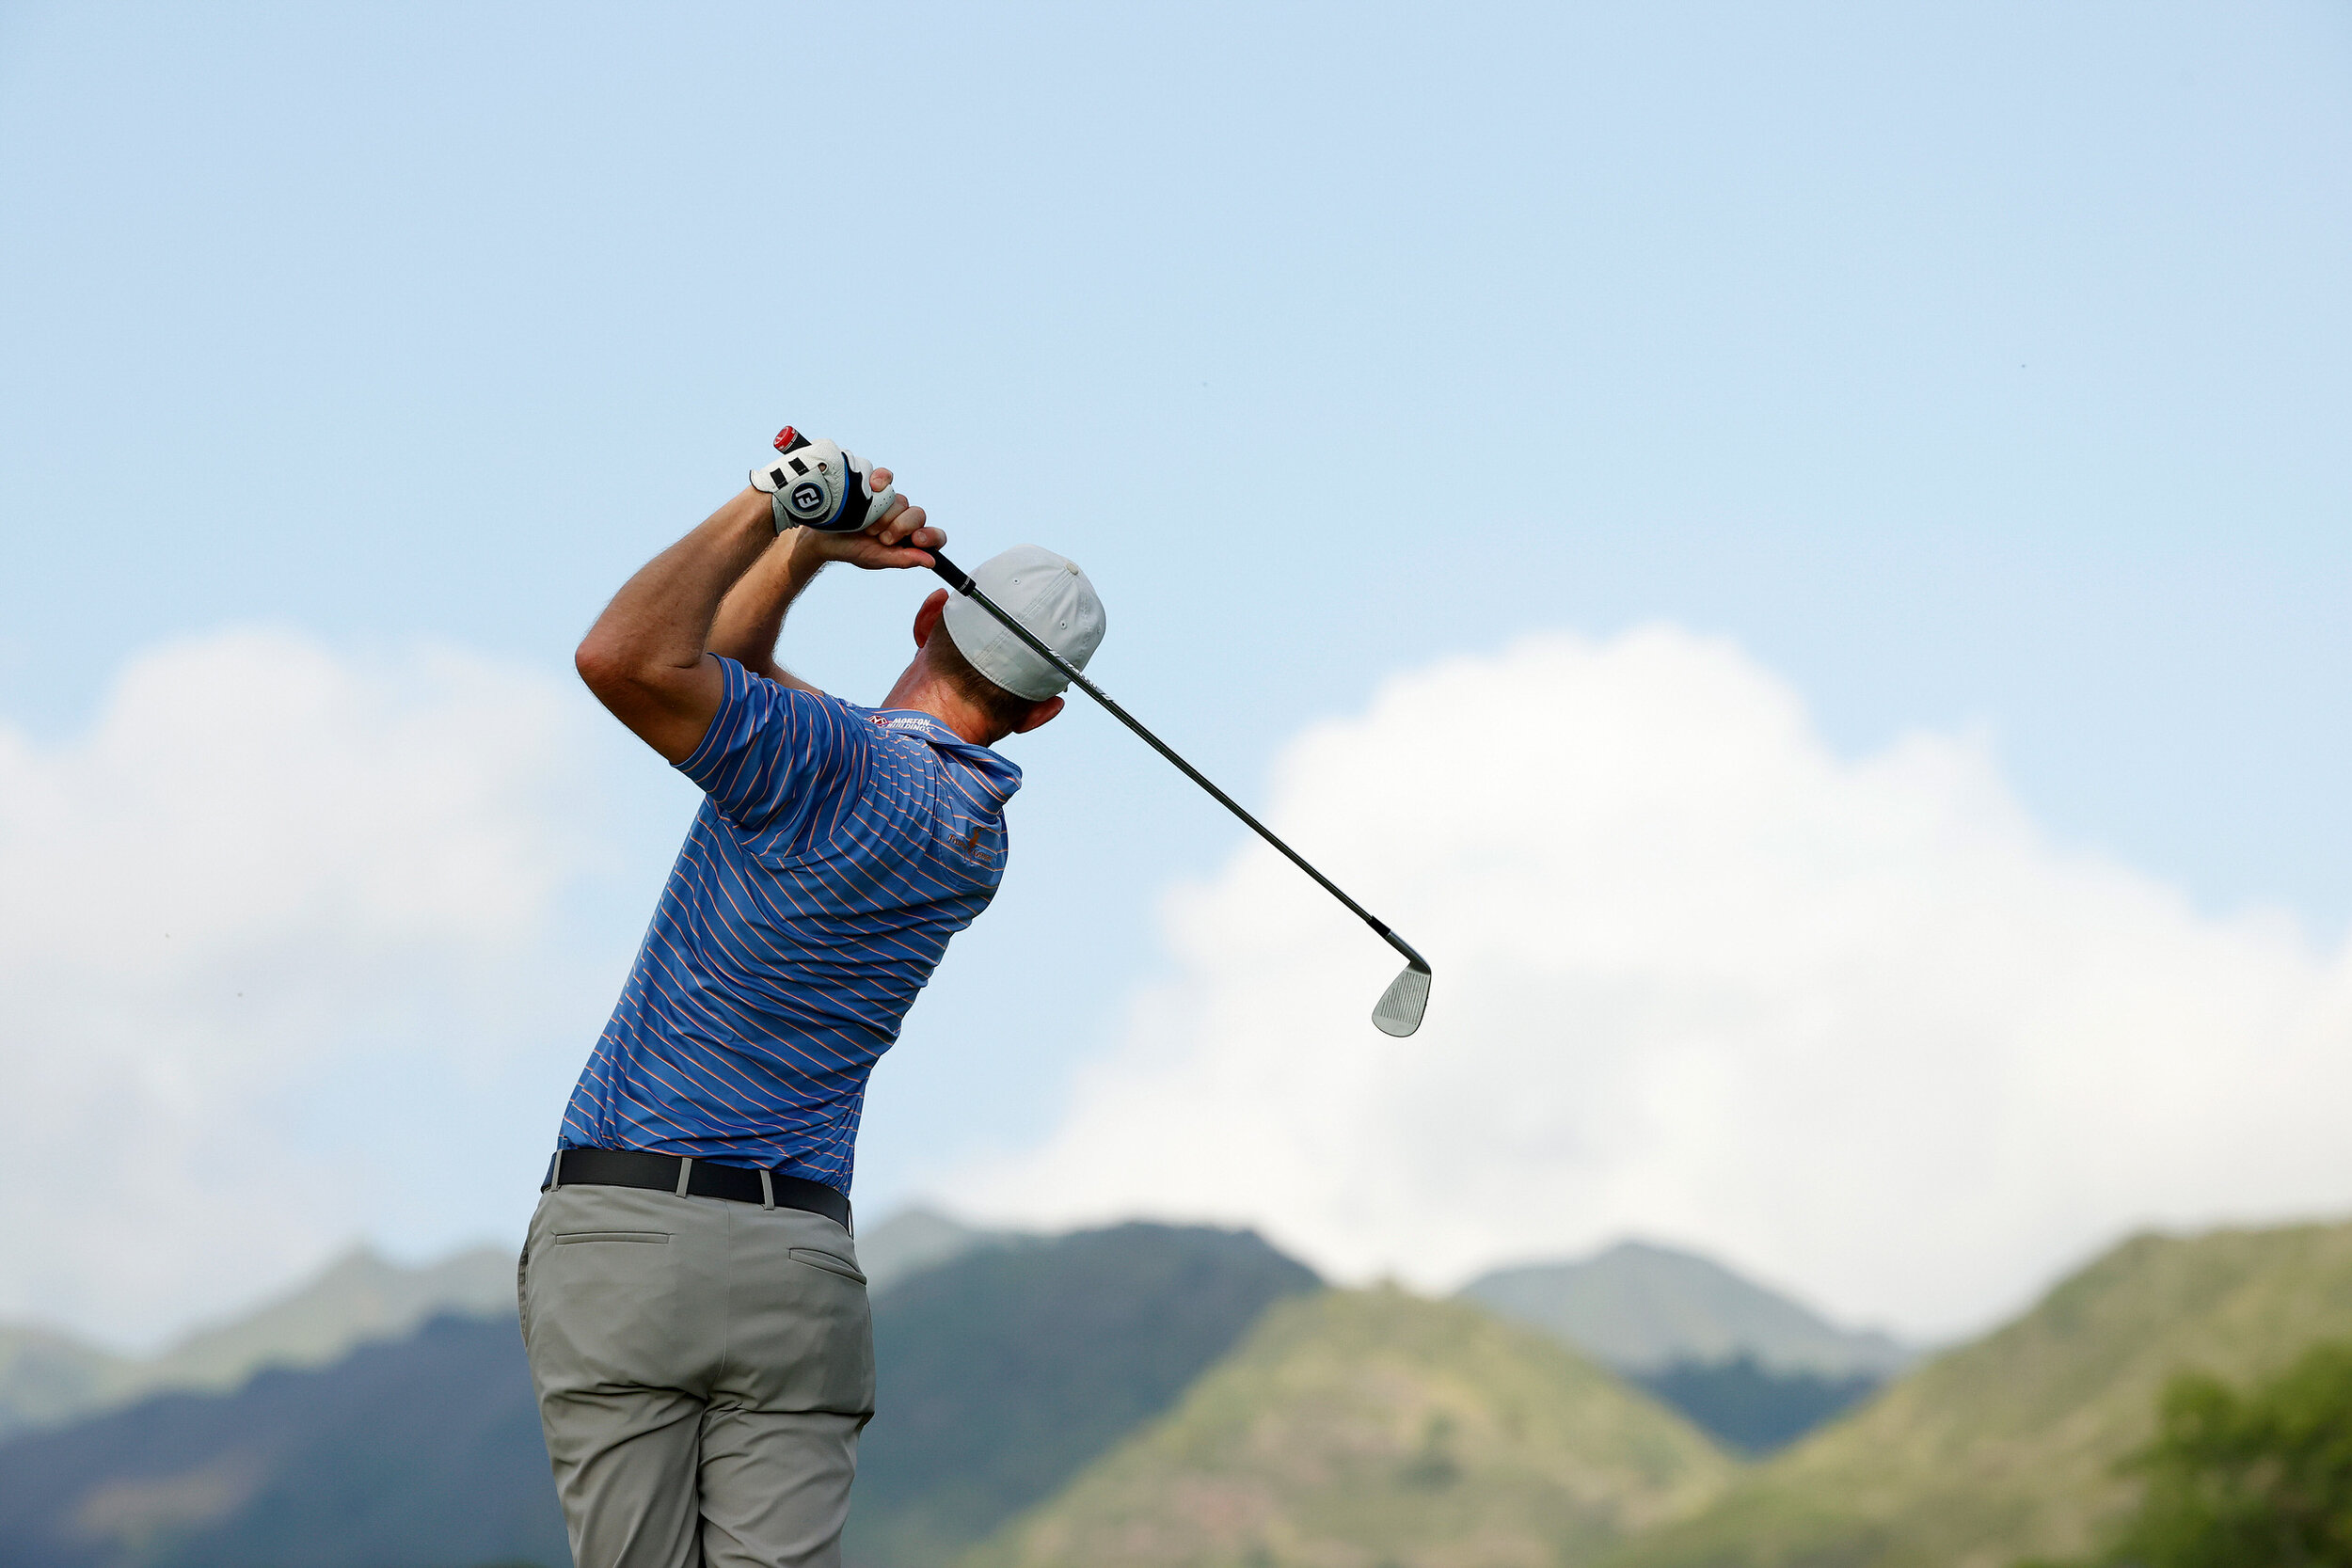  HONOLULU, HAWAII - JANUARY 15: Vaughn Taylor of the United States plays his shot from the seventh tee during the second round of the Sony Open in Hawaii at the Waialae Country Club on January 15, 2021 in Honolulu, Hawaii. (Photo by Cliff Hawkins/Get